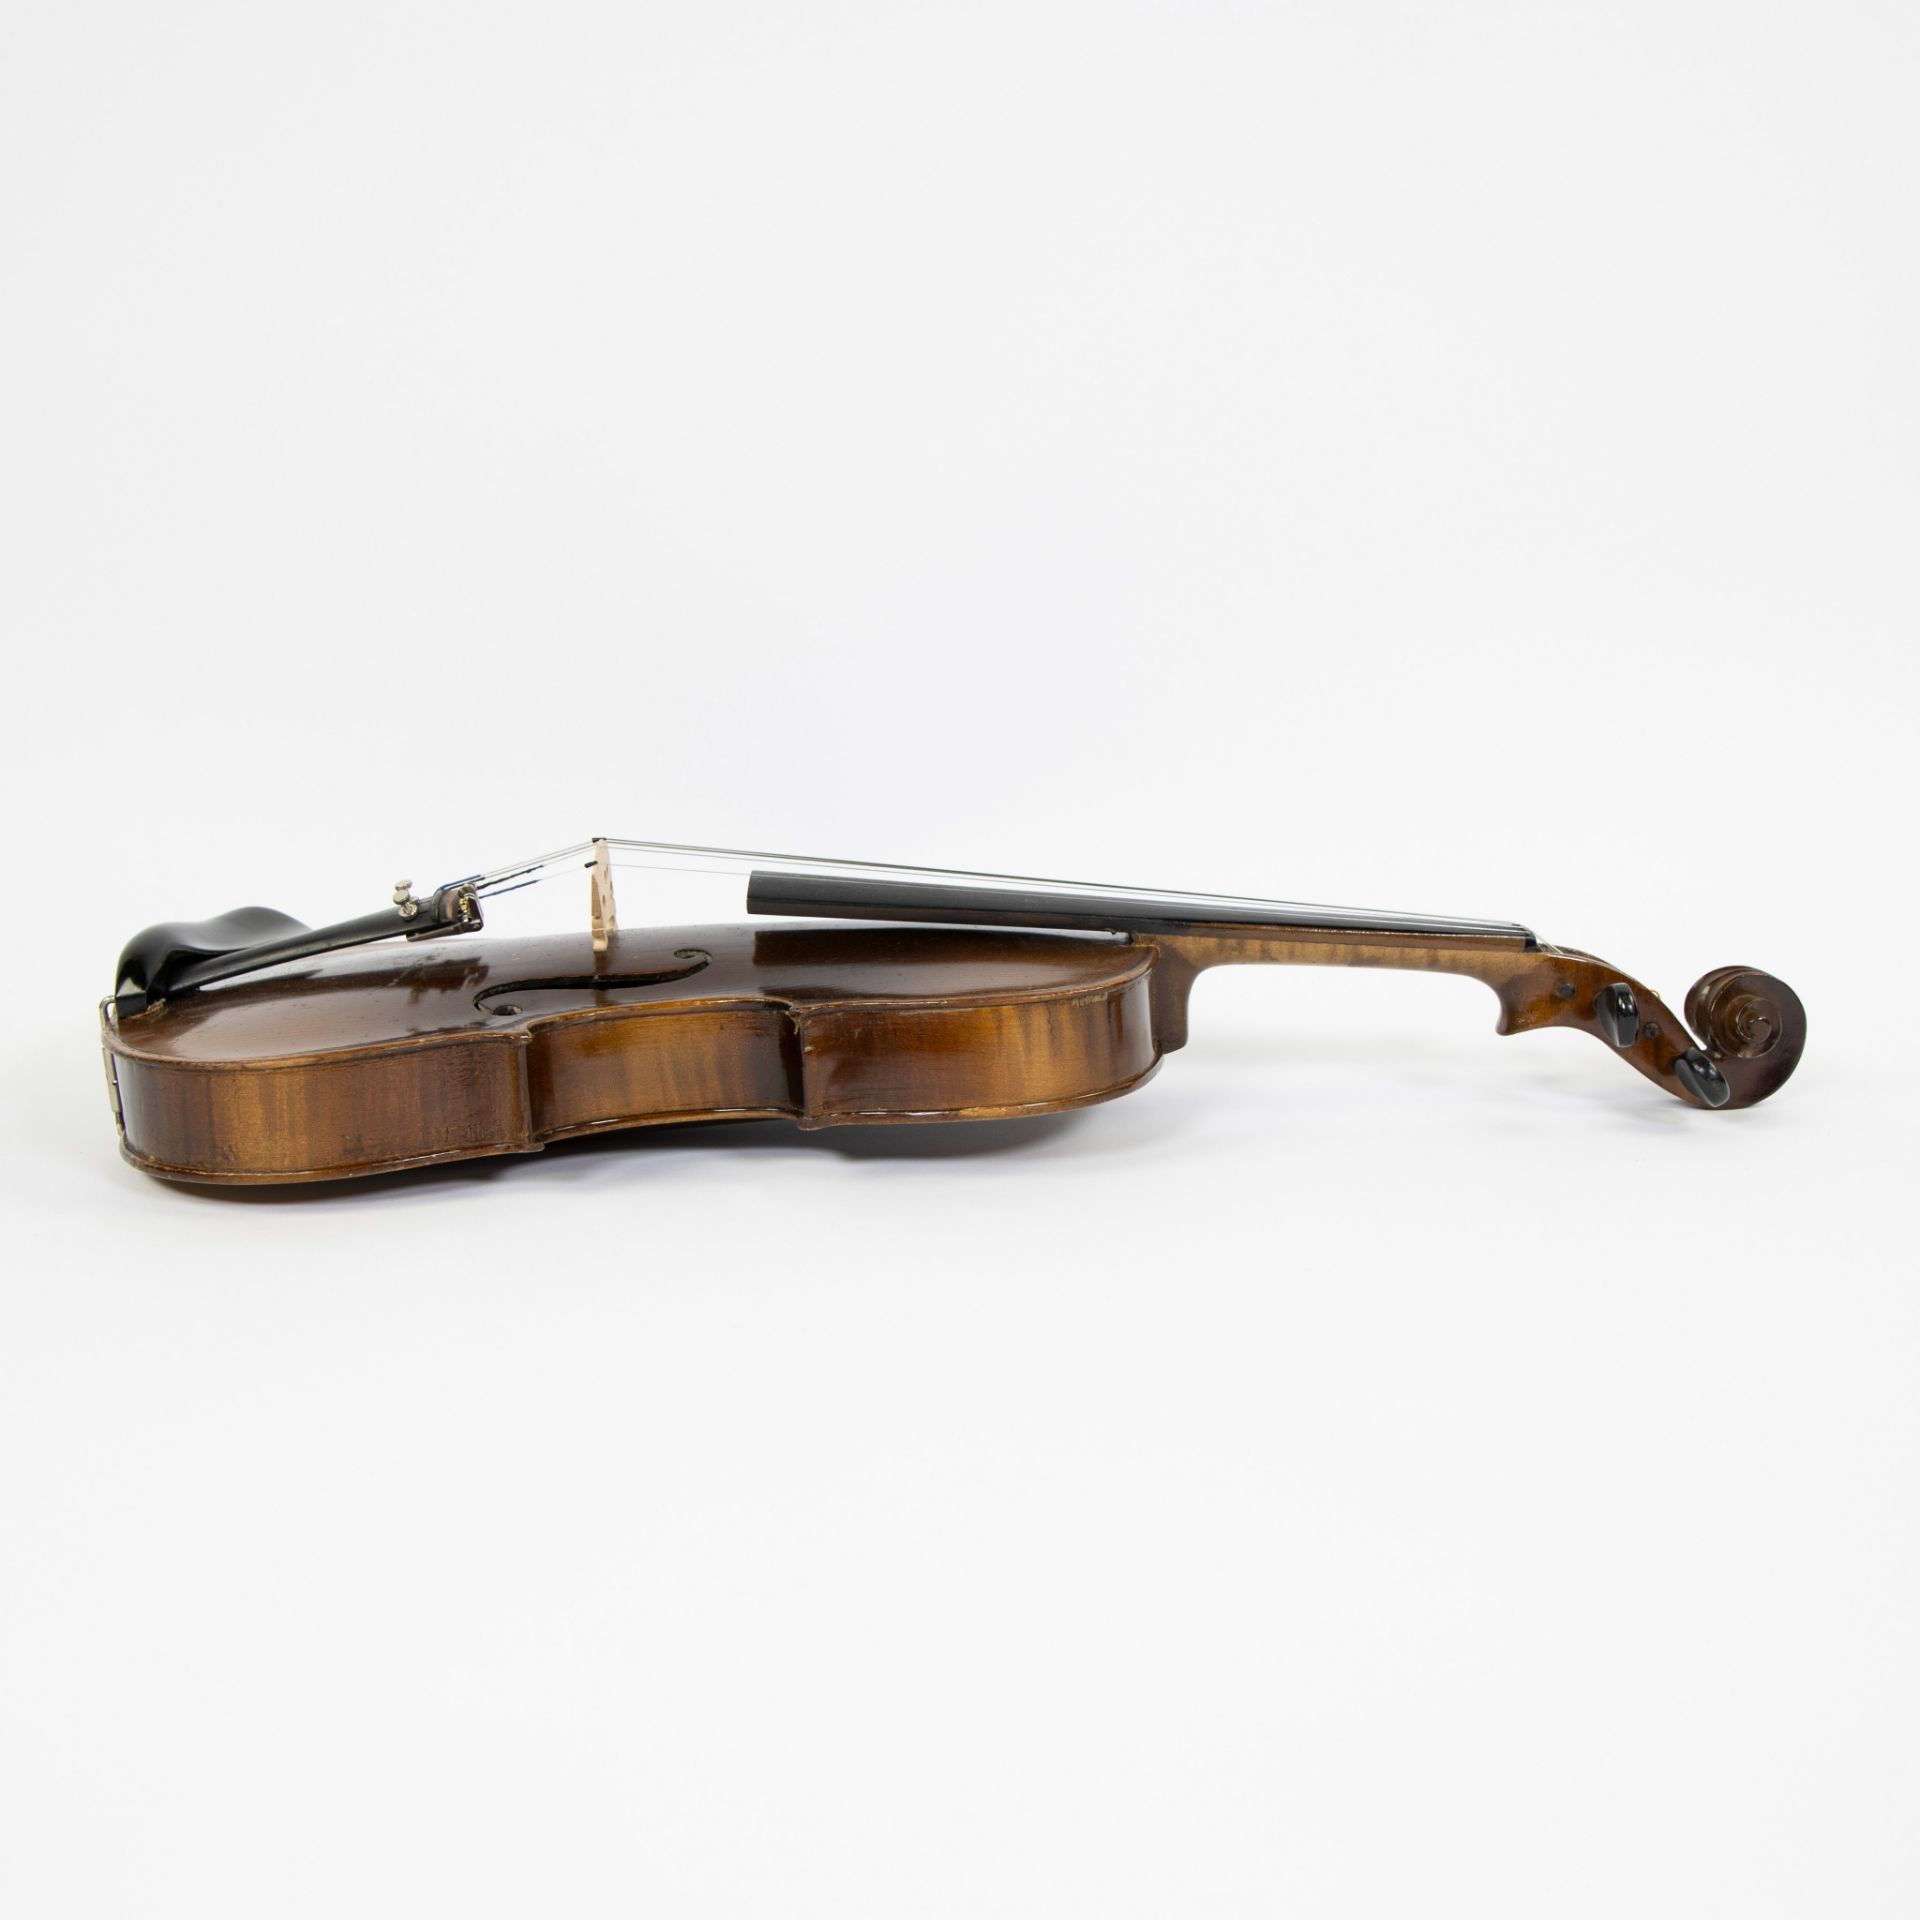 Violin label 'Jacob Schmidbauer, ano 1839', 360mm, playable, wooden case - Image 4 of 5